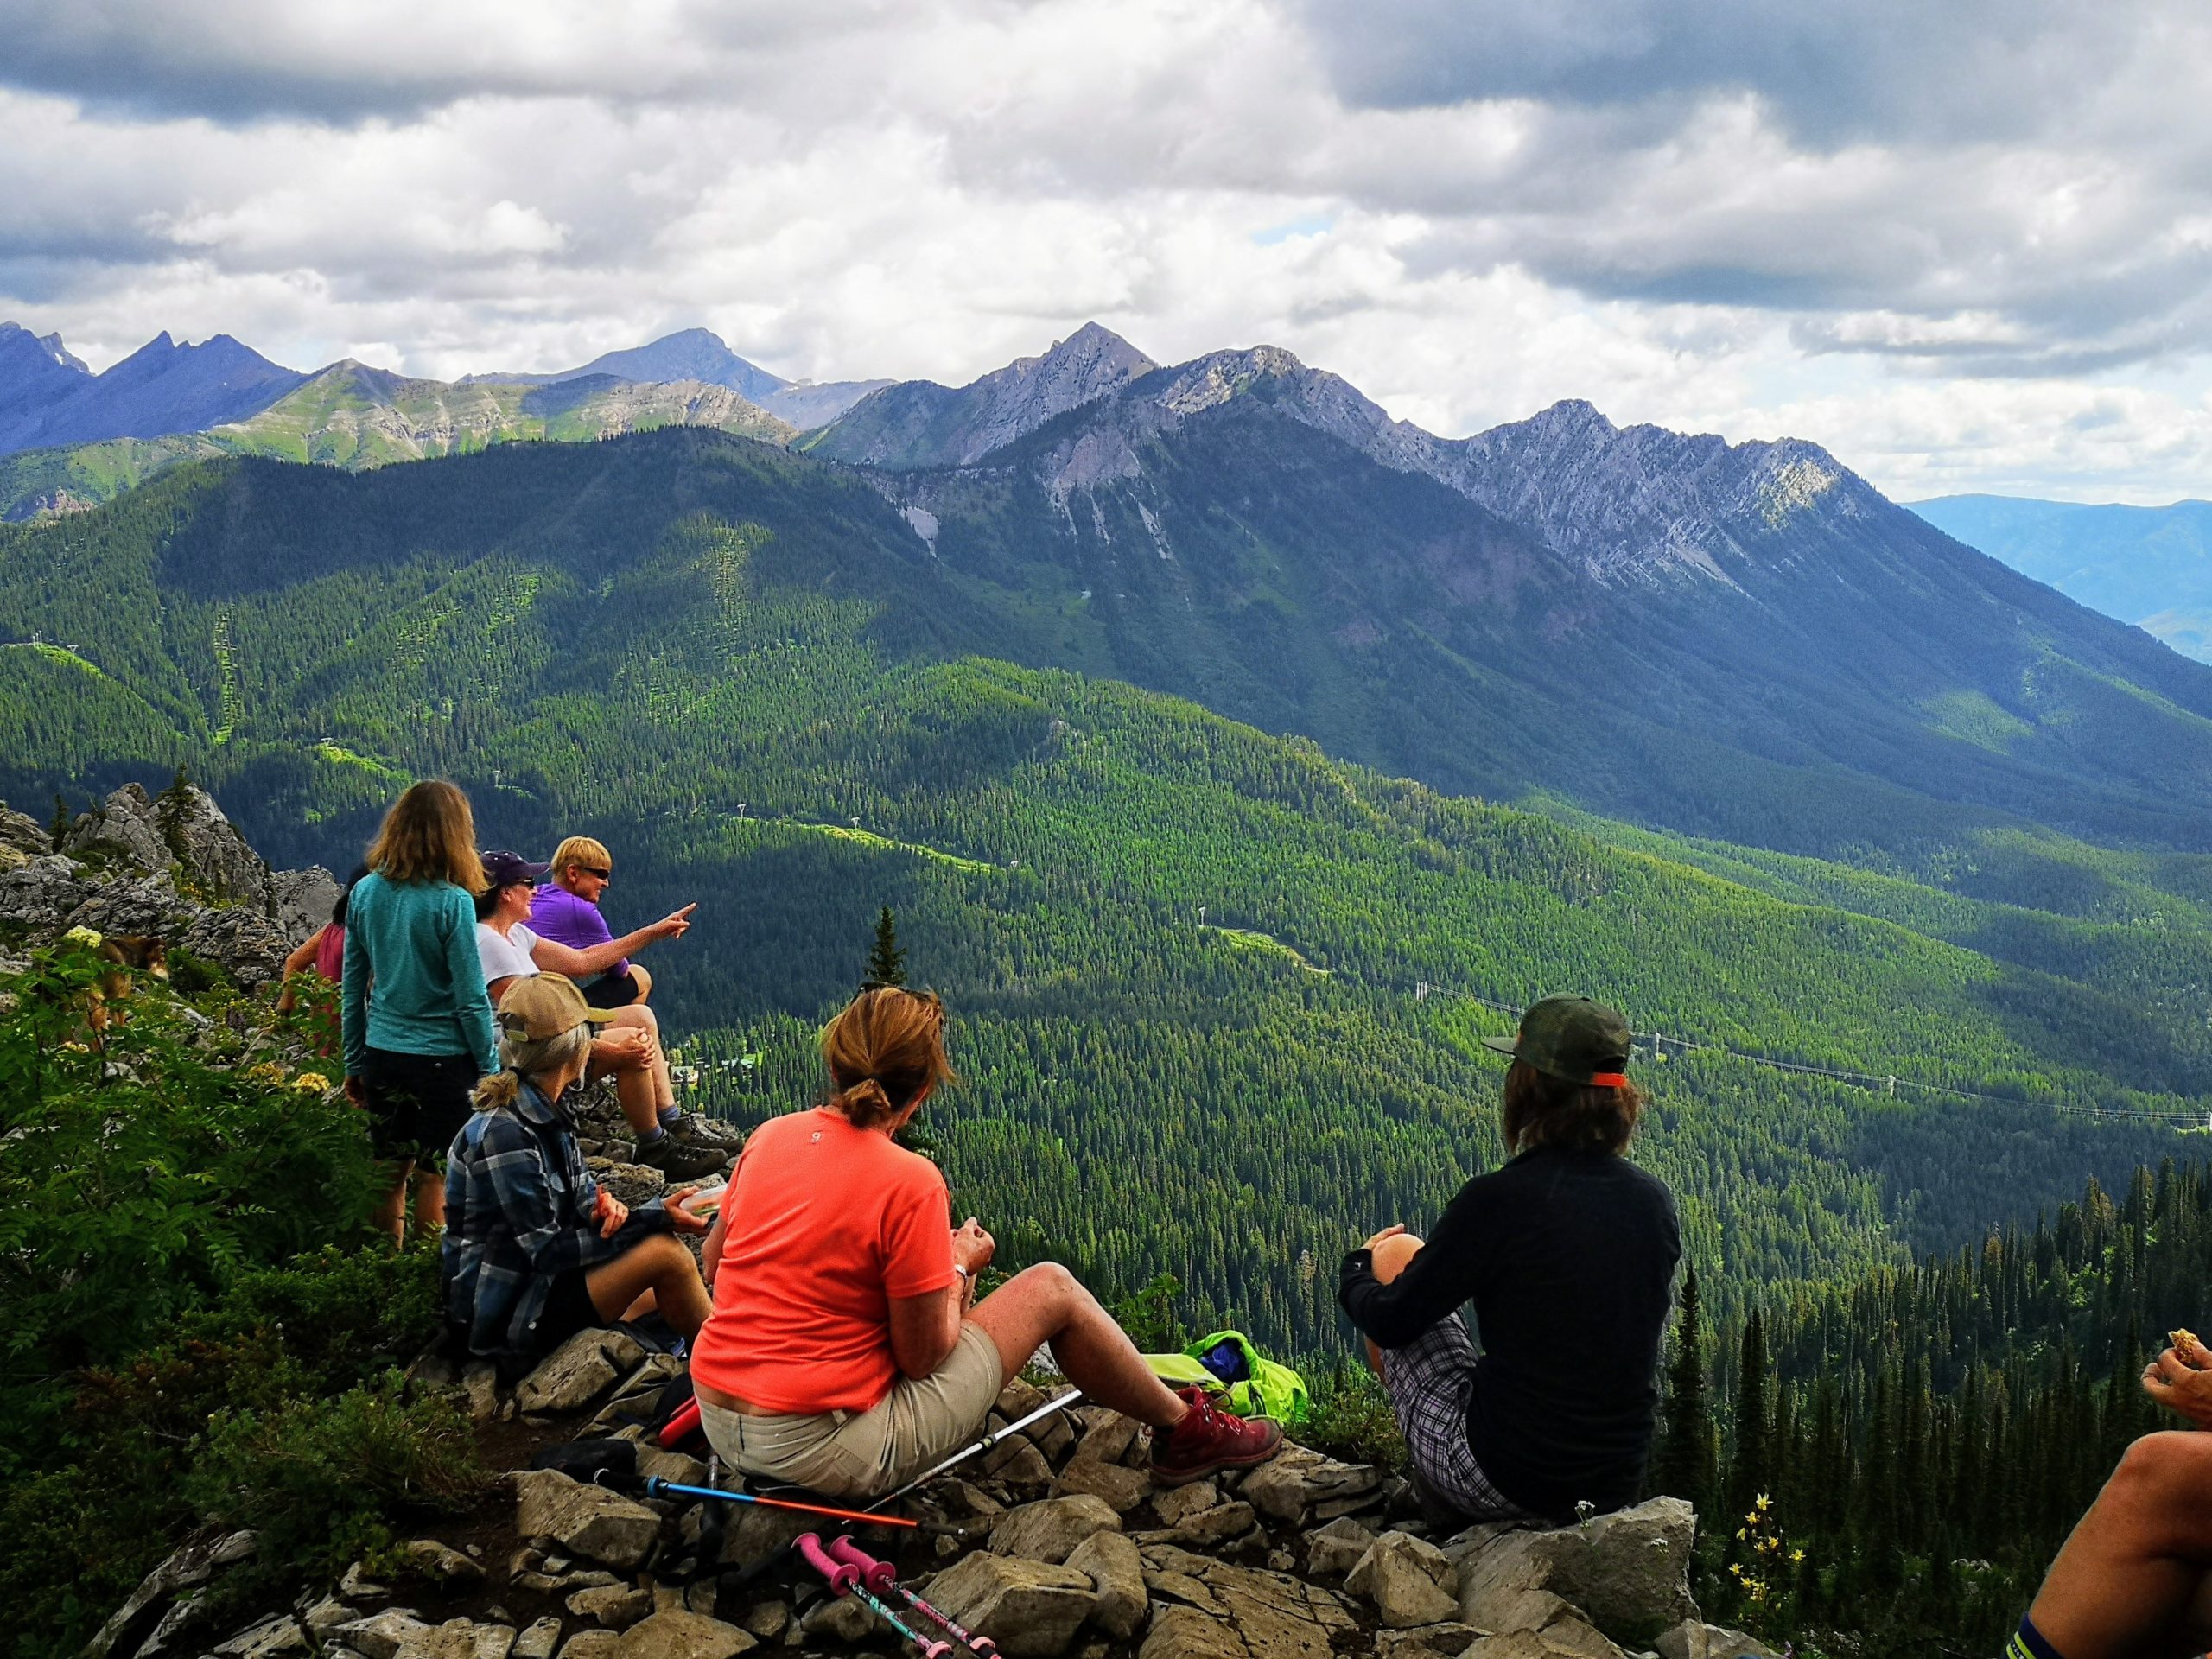 A group of people sit on the top of a moutain, looking out across a valley